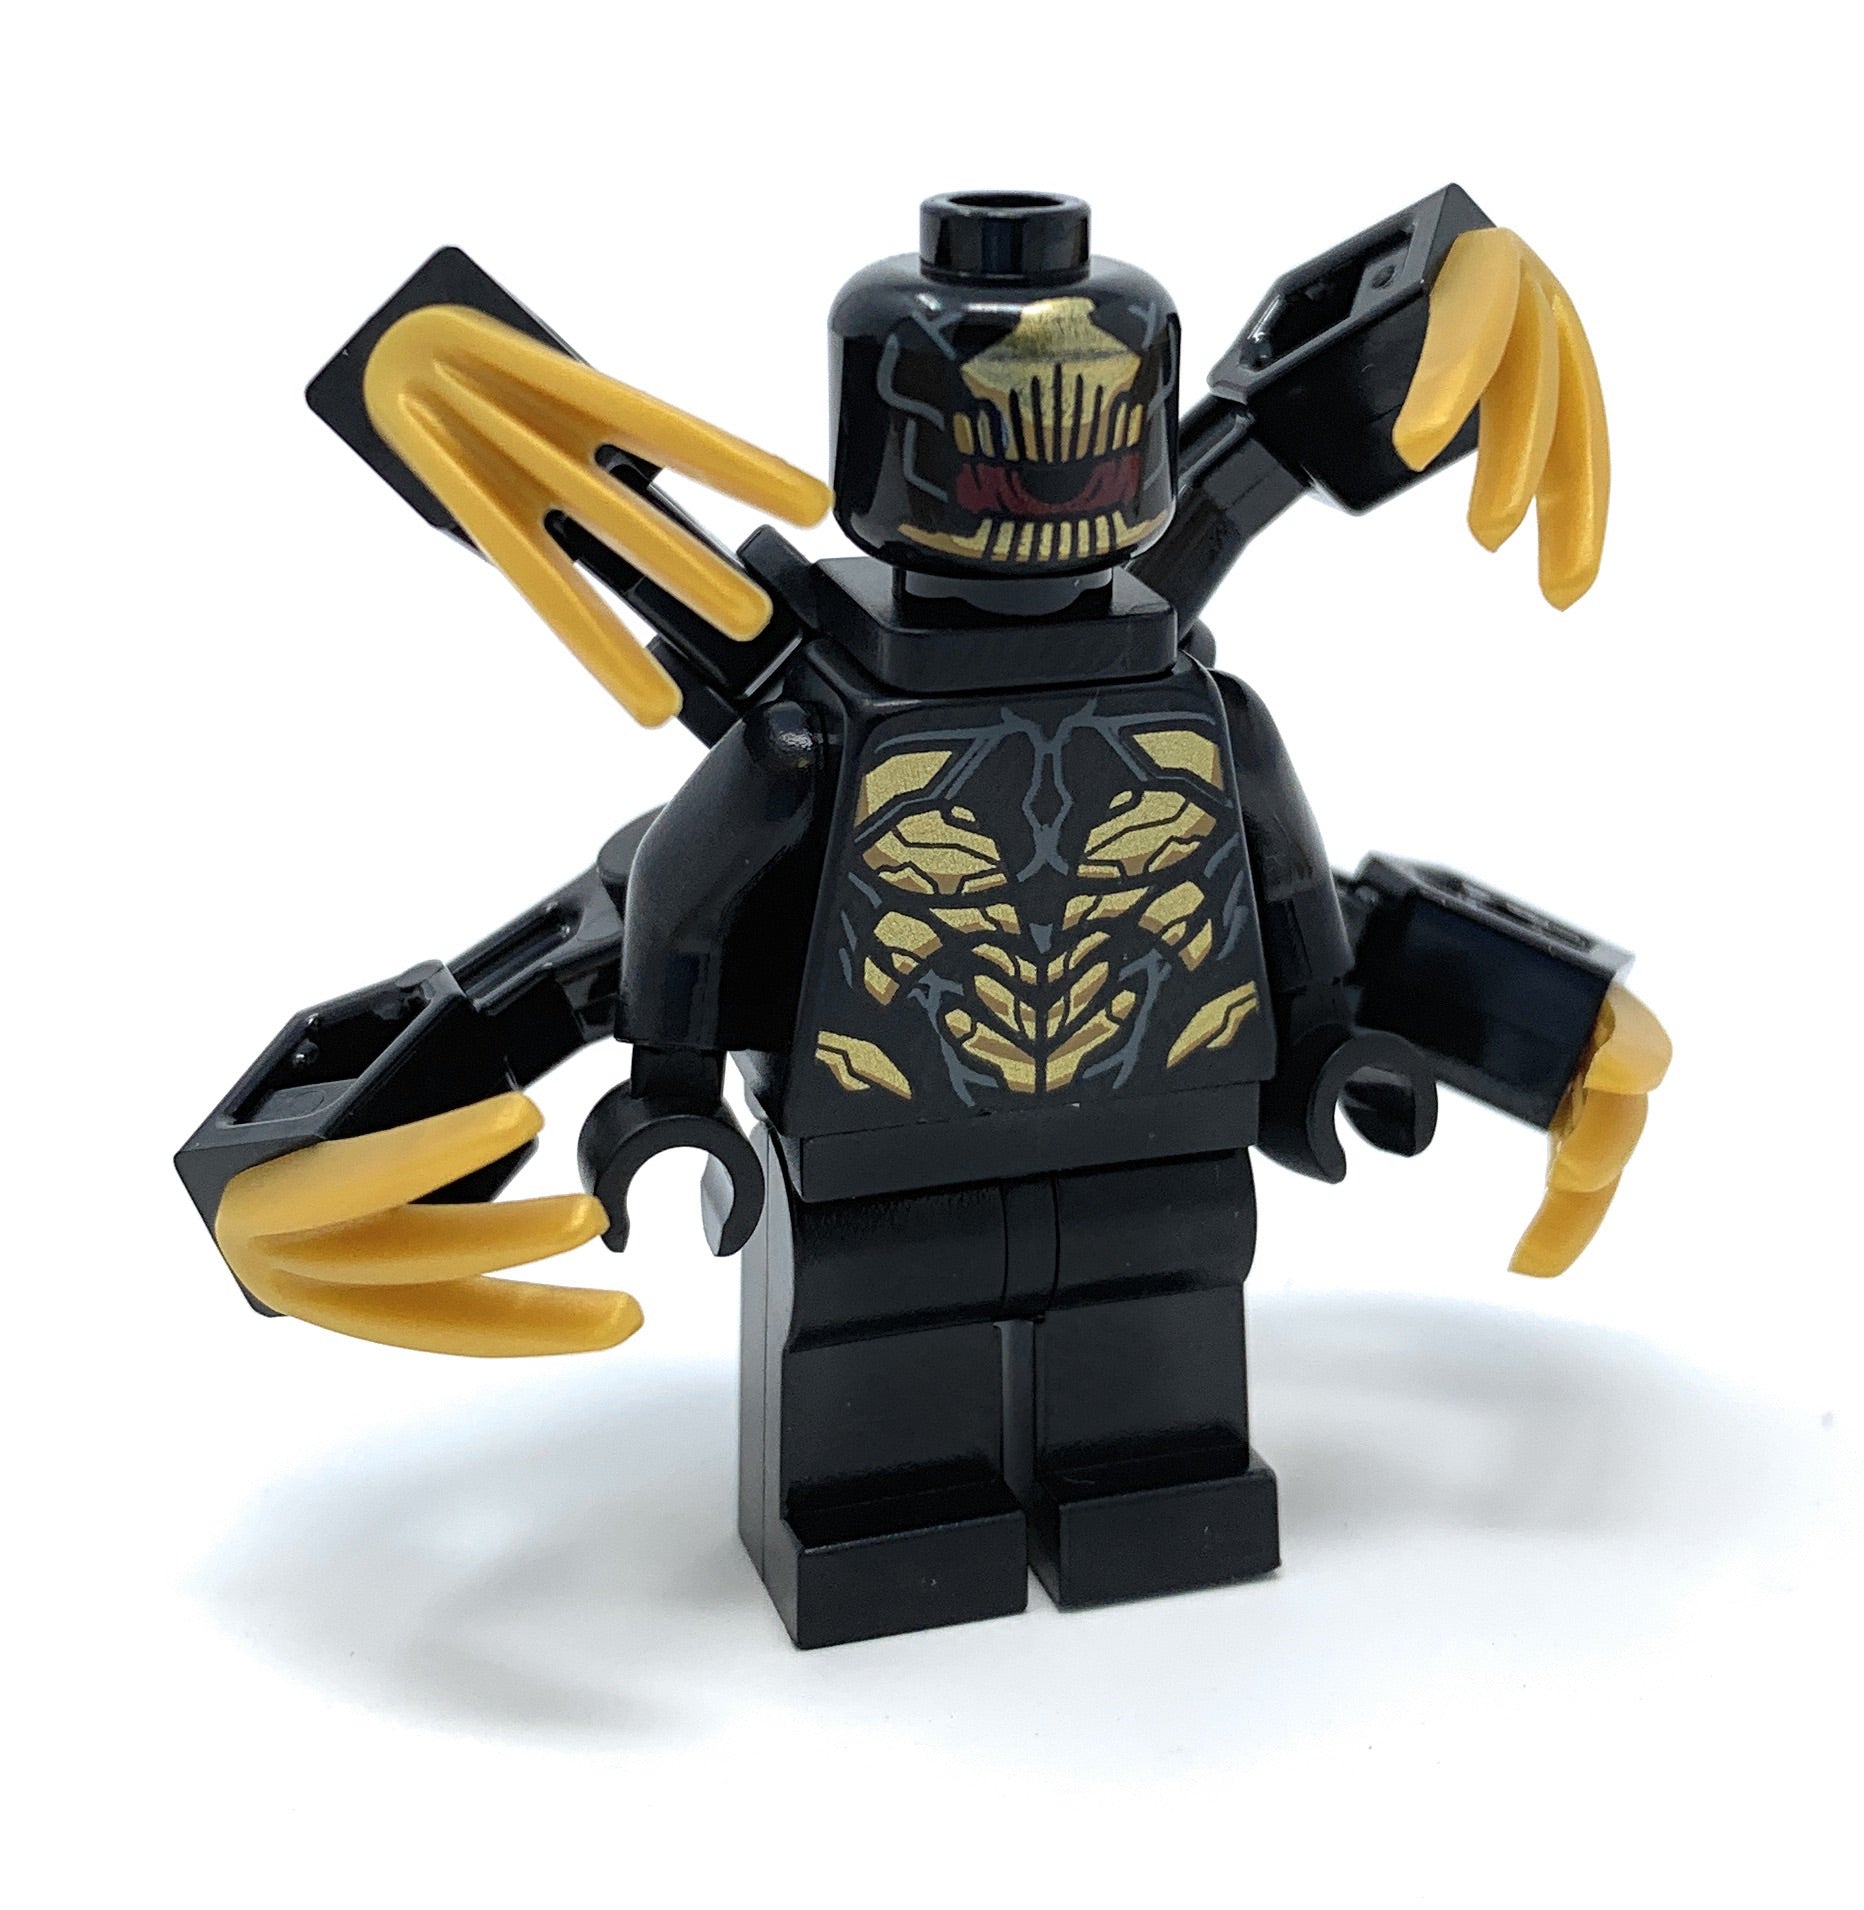 Outrider (Extended Claws) - LEGO Marvel Avengers: Endgame Minifigure (2019)